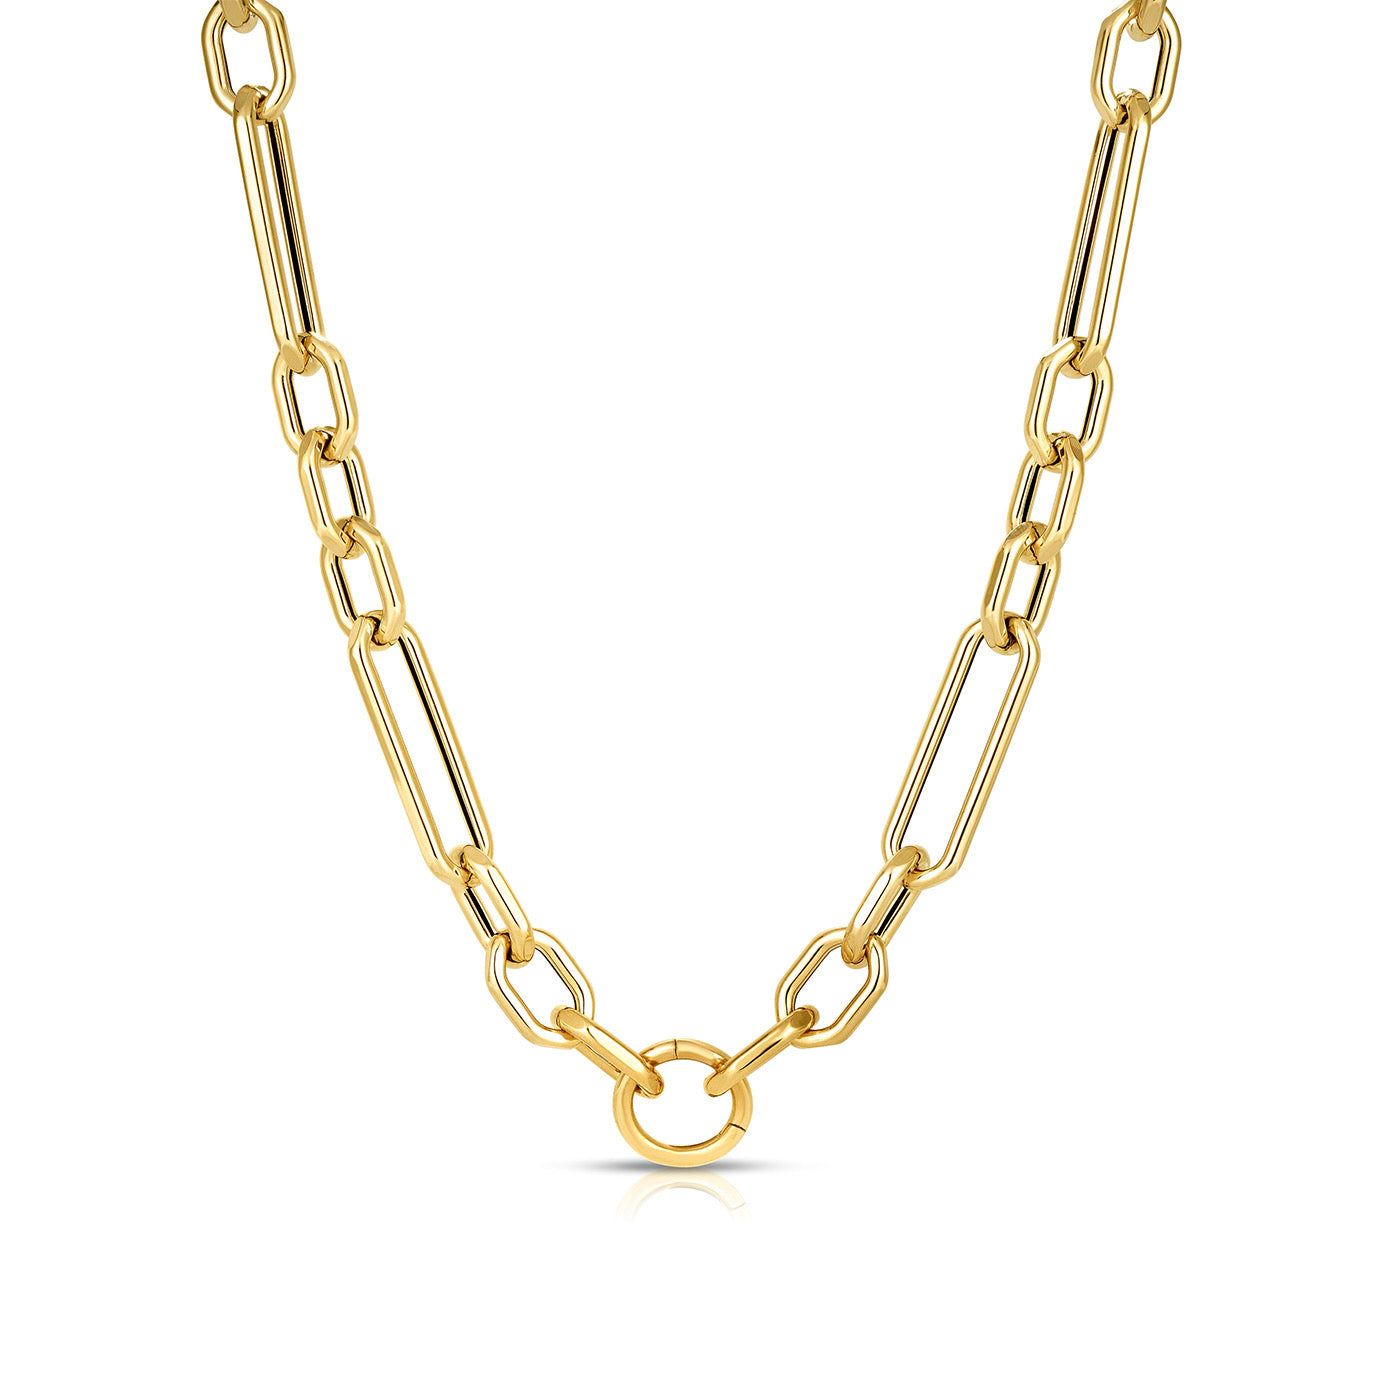 Multi-Link Chain Necklace